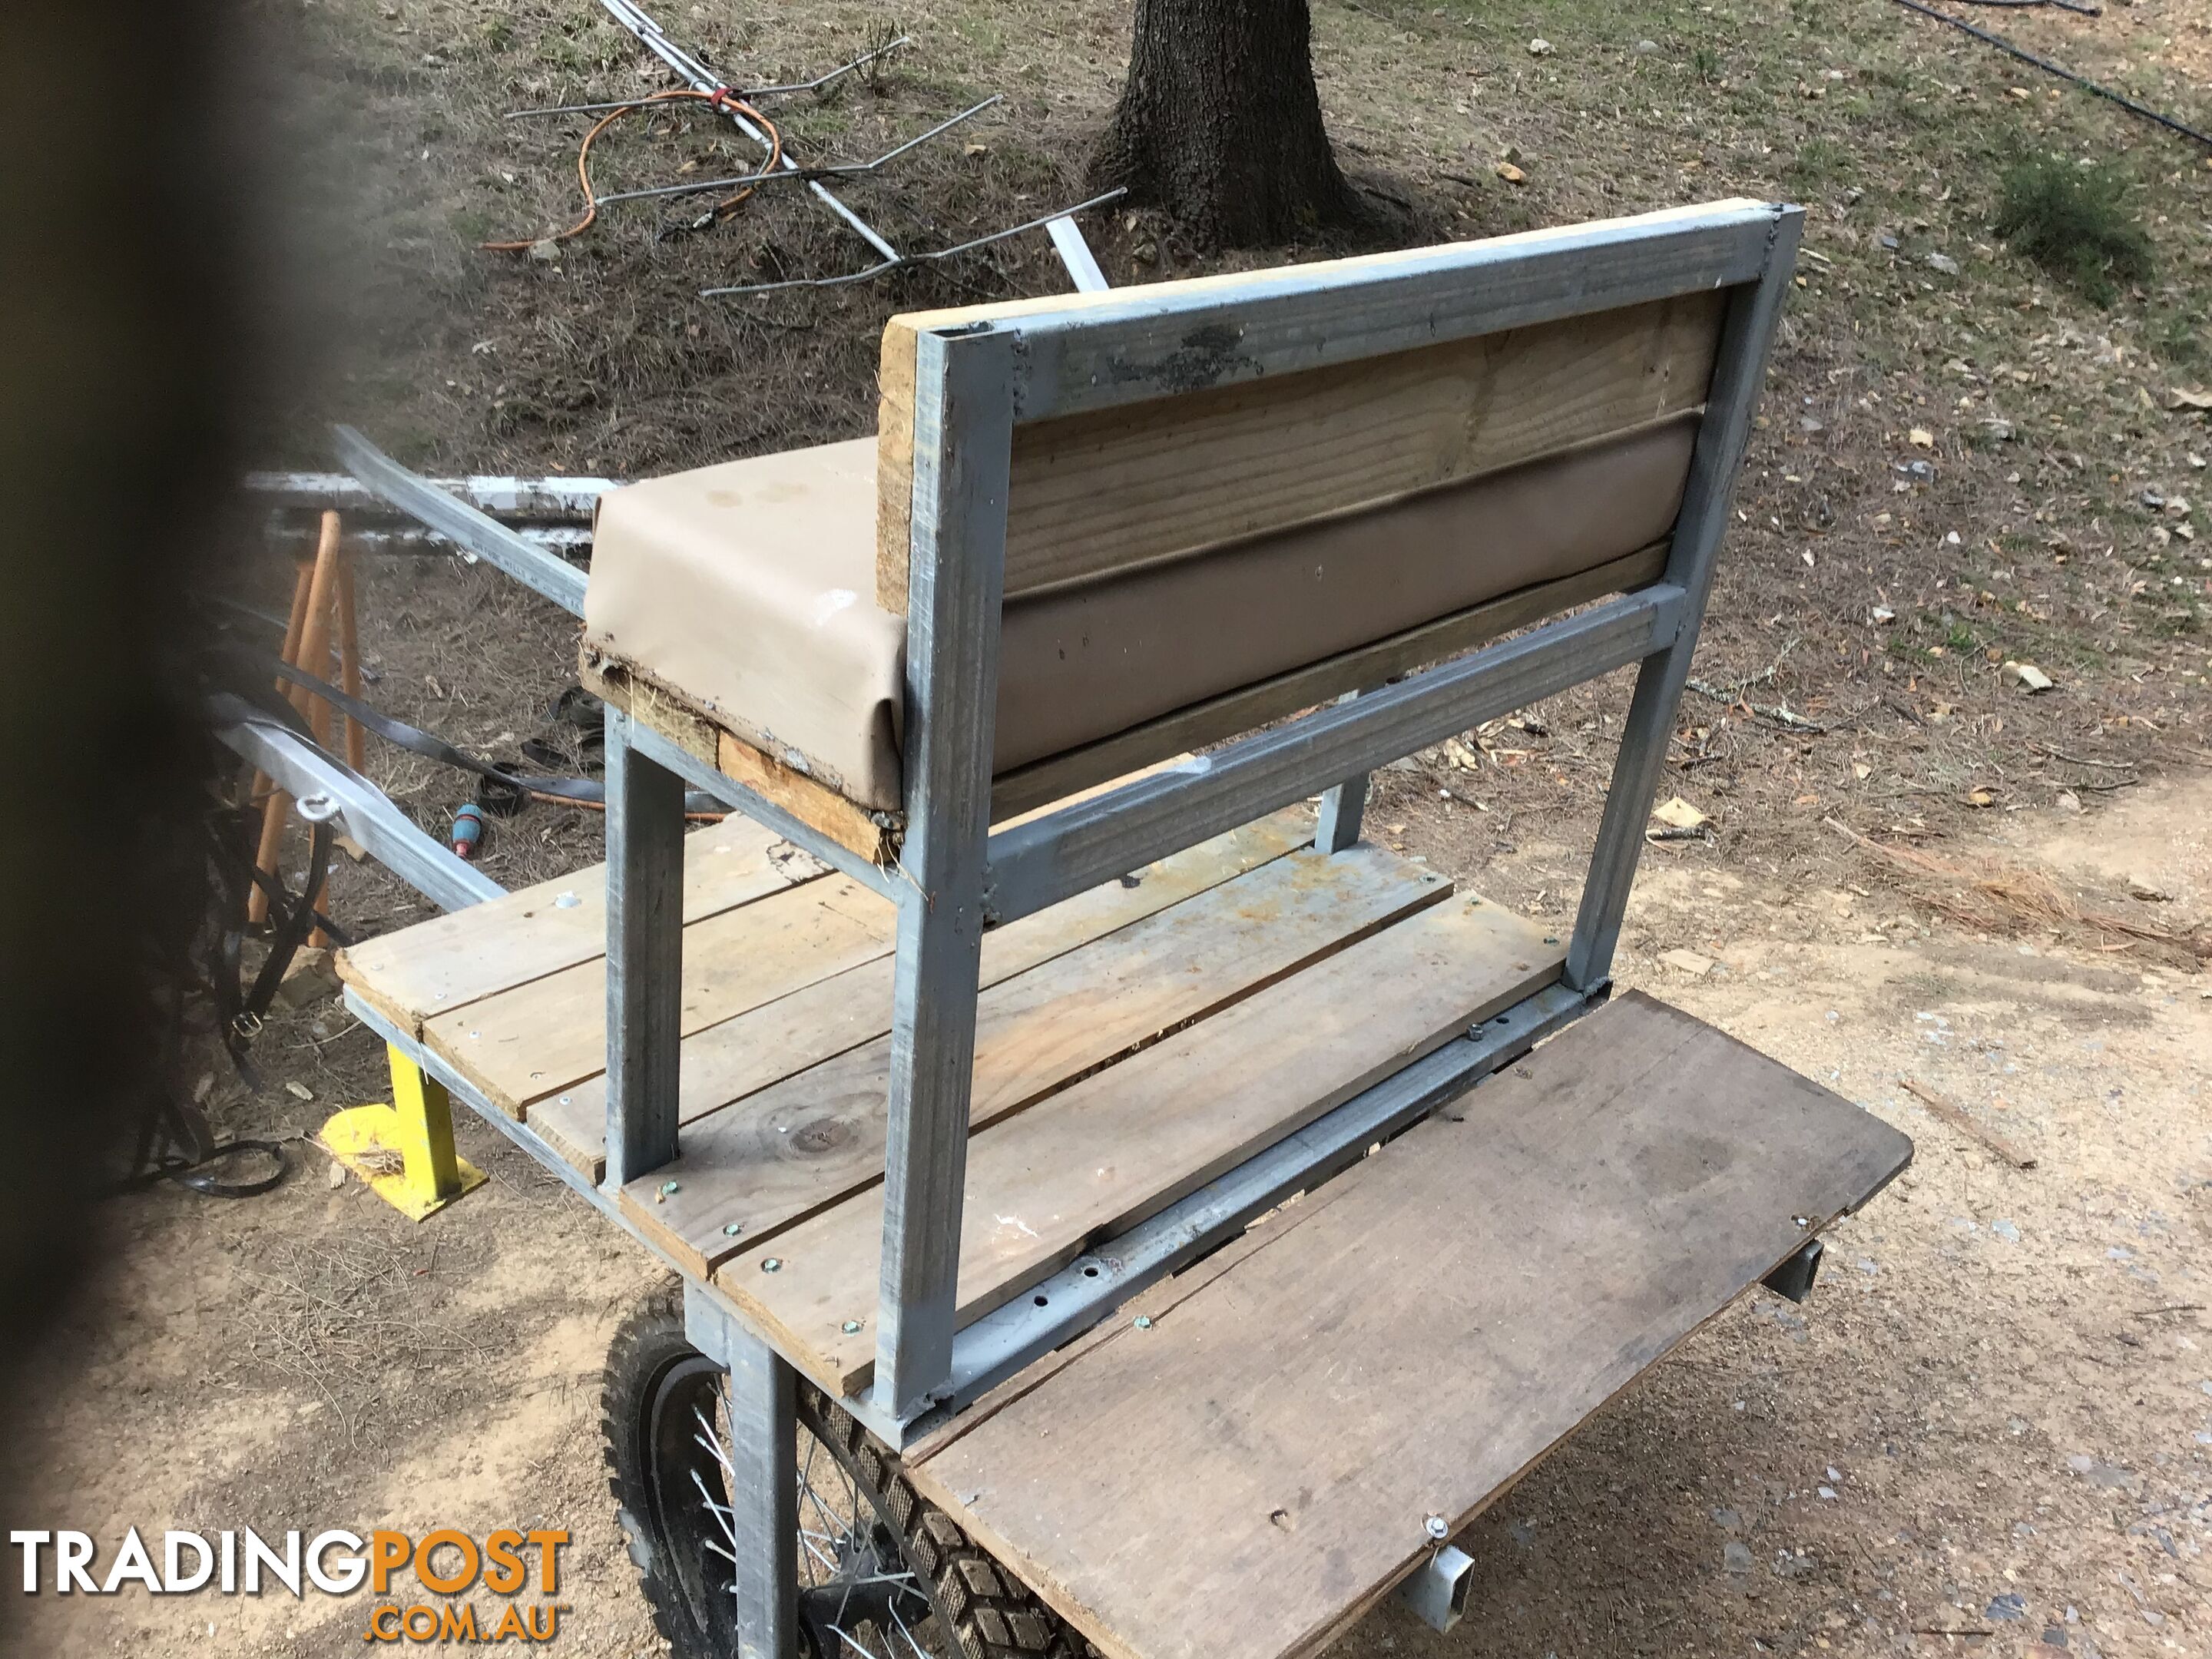 Pony cart/sulky with all new harness